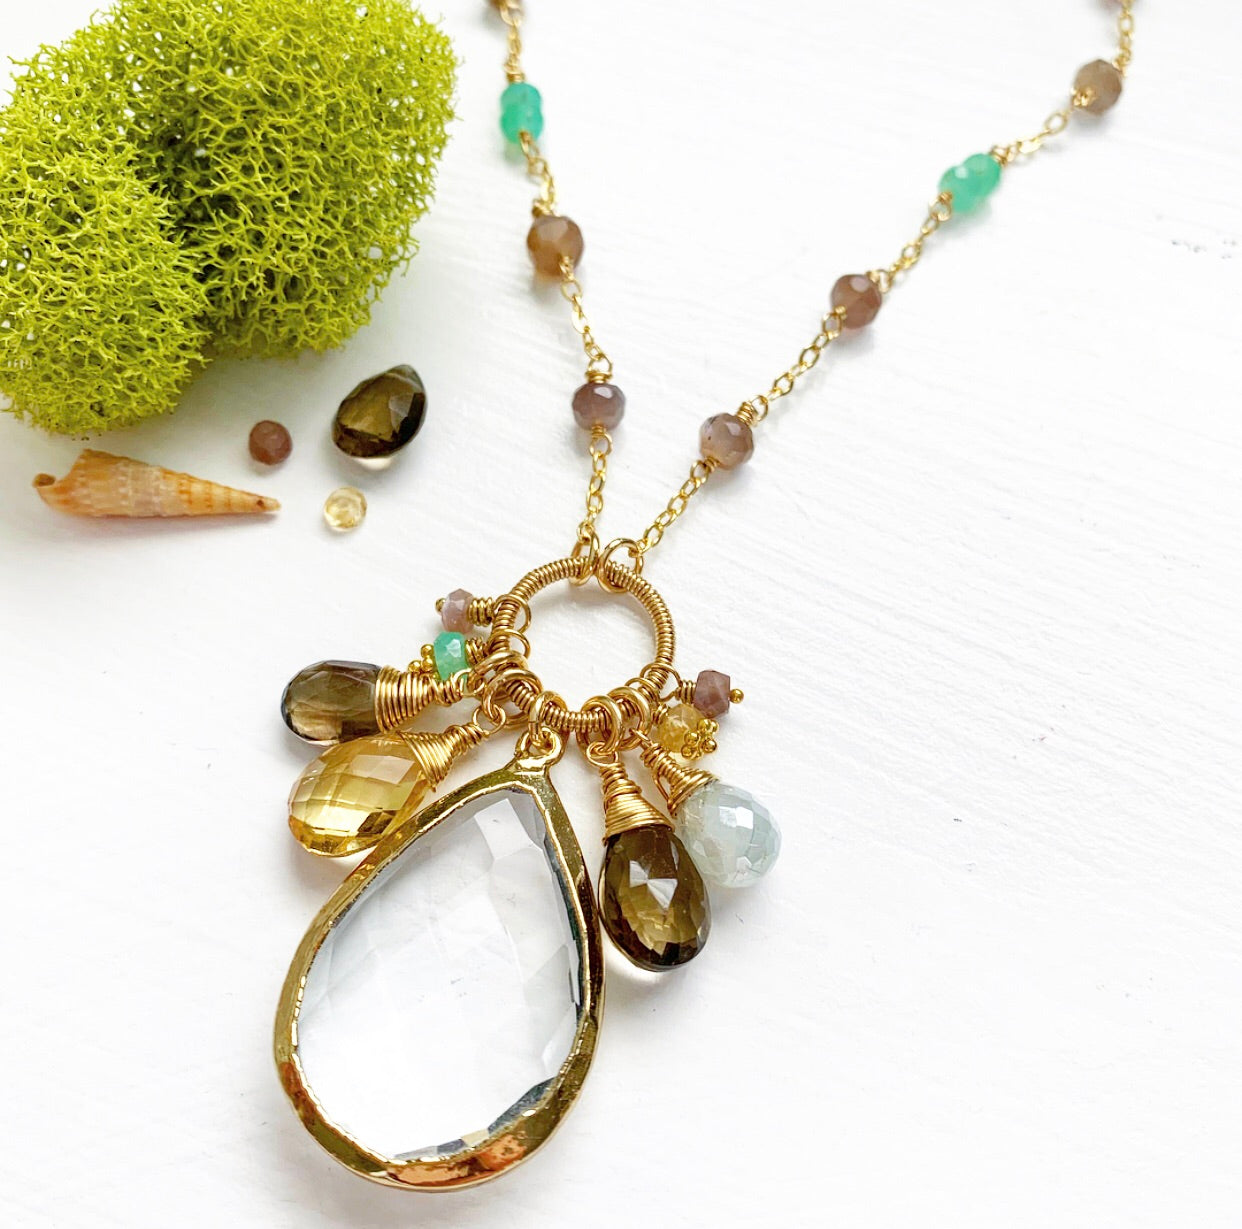 768-One of a Kind Gemstone Drop Necklace